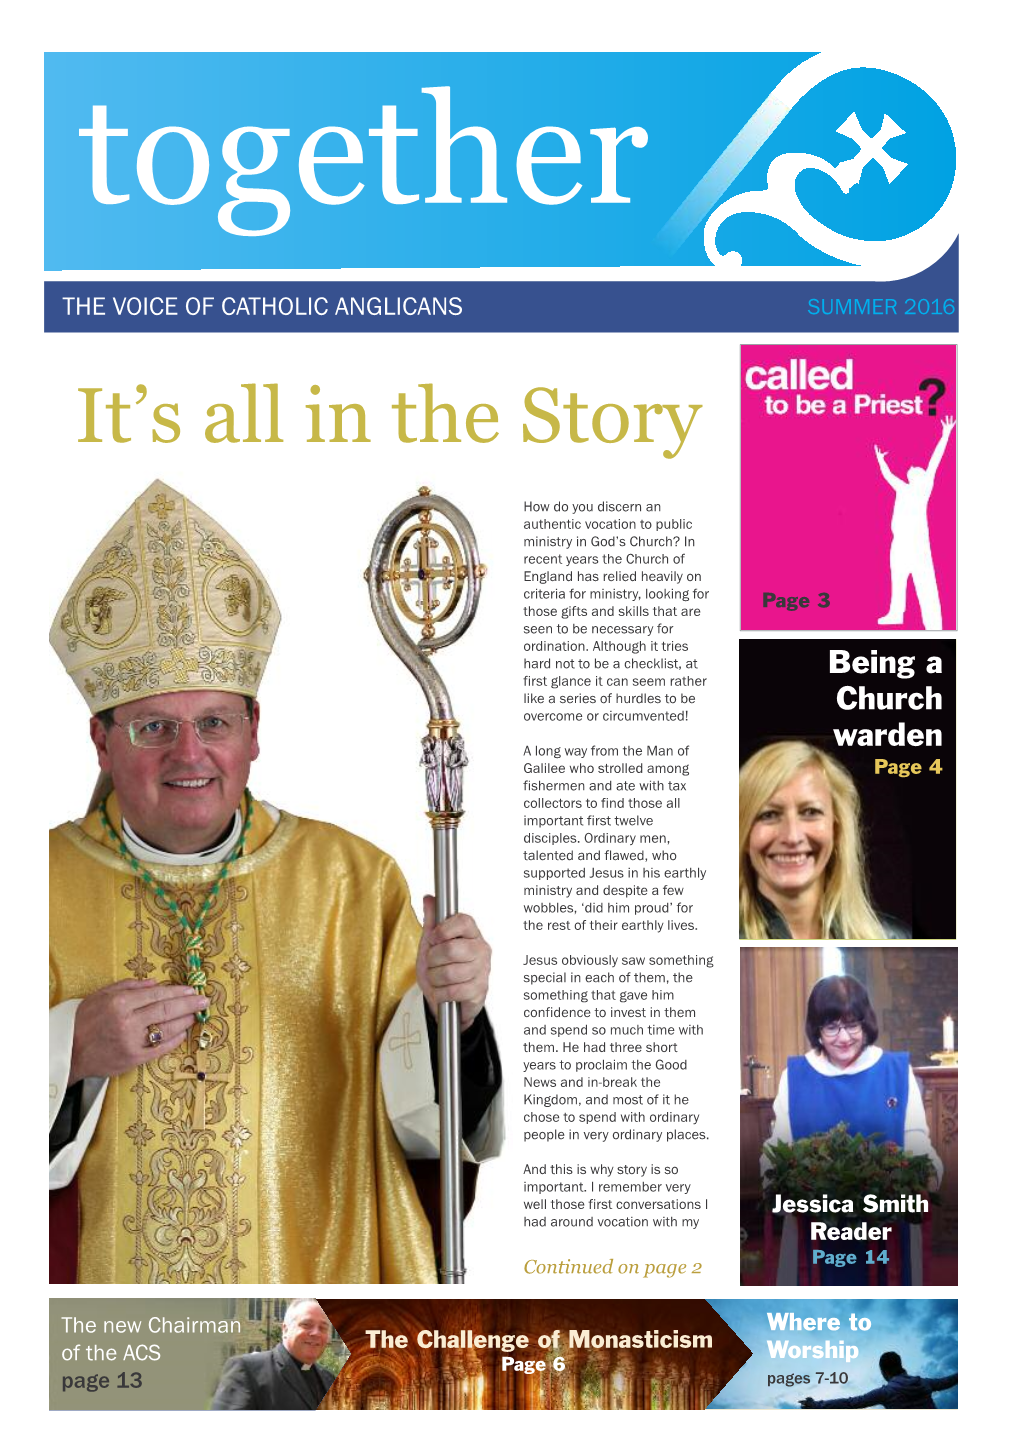 The Voice of Catholic Anglicans Summer 2016